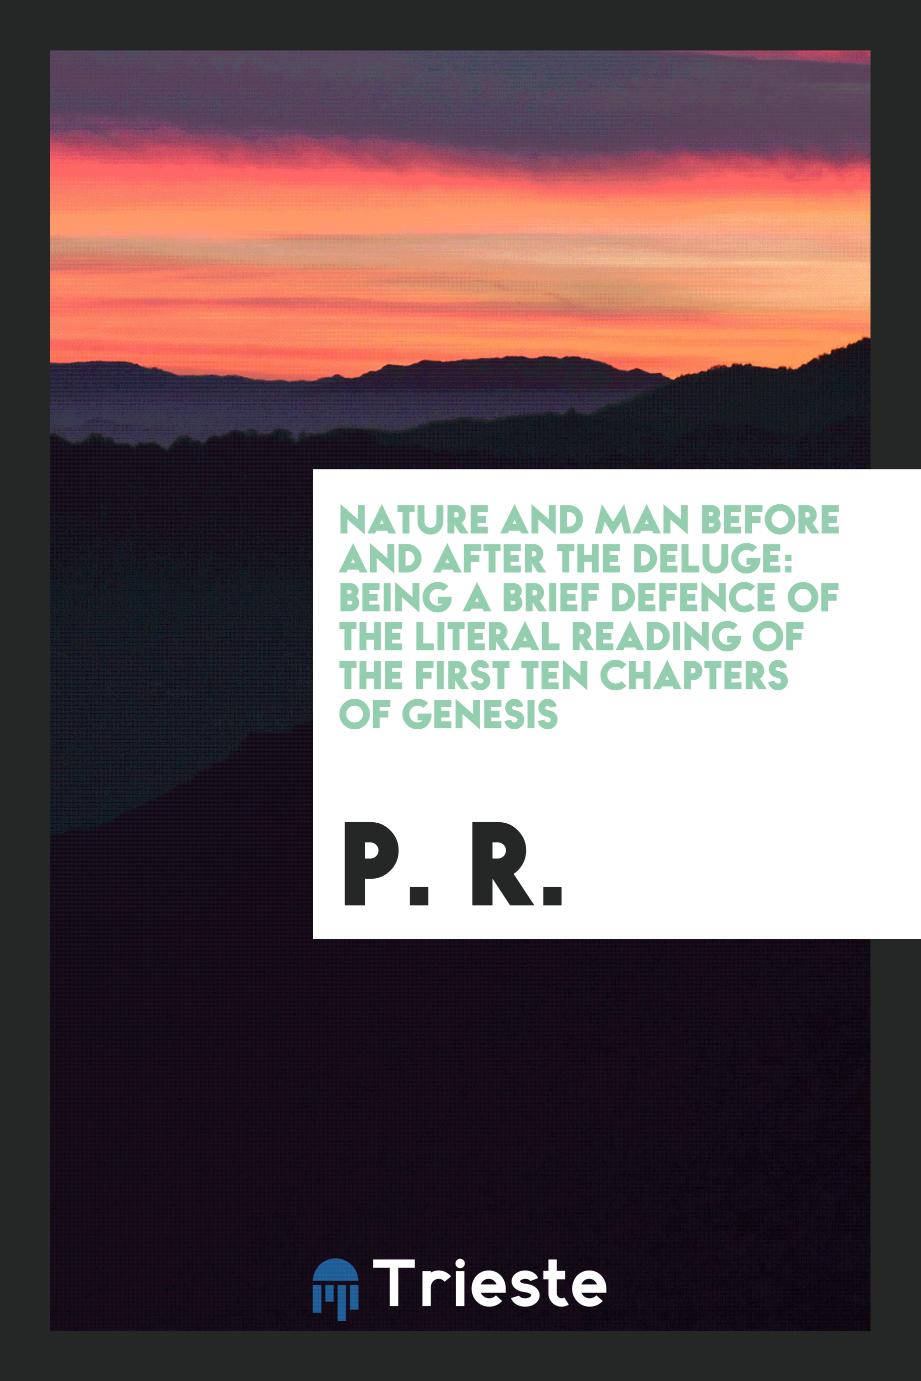 Nature and Man Before and After the Deluge: Being a Brief Defence of the Literal Reading of the first ten chapters of genesis